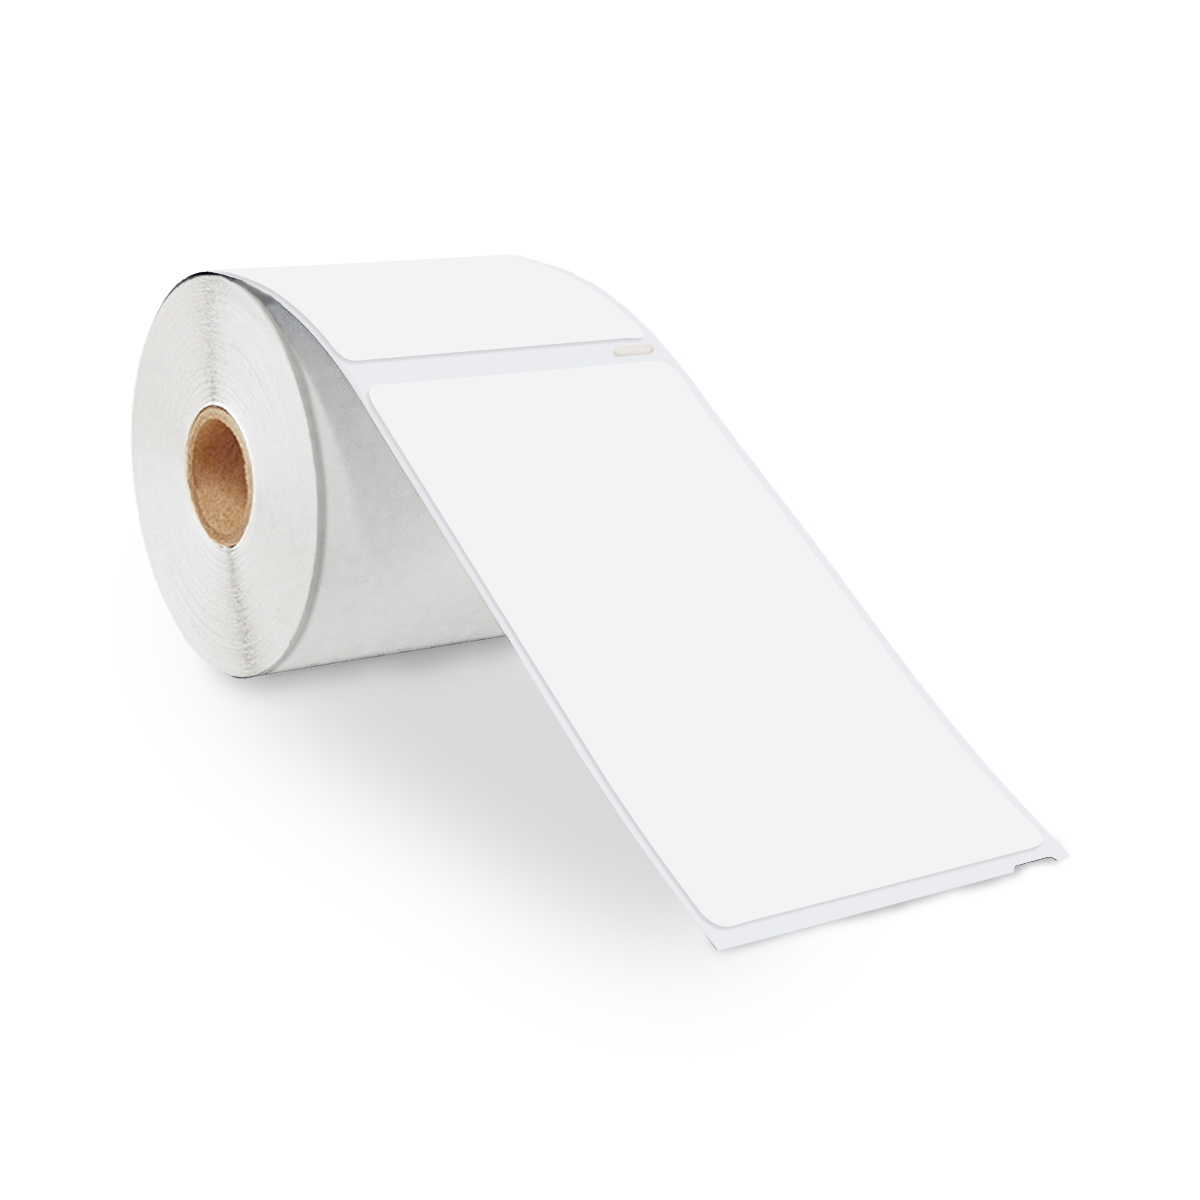 New 6 Rolls Dymo 30857 Compatible 2-1/4" x 4" LabelWriter Self-Adhesive White.. 